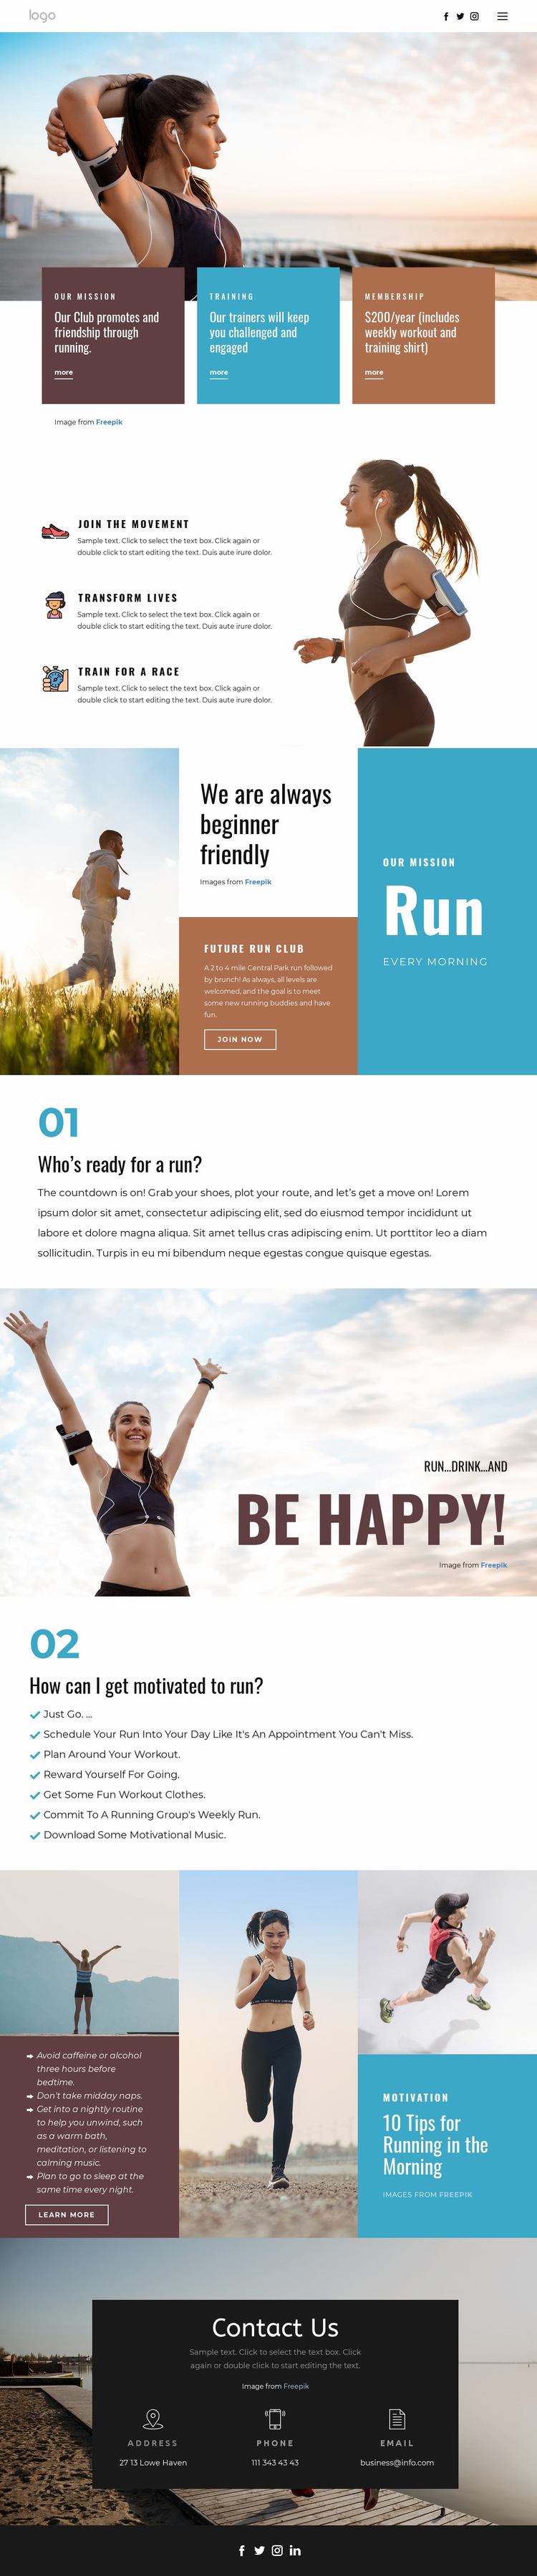 Running club for sports Web Page Design